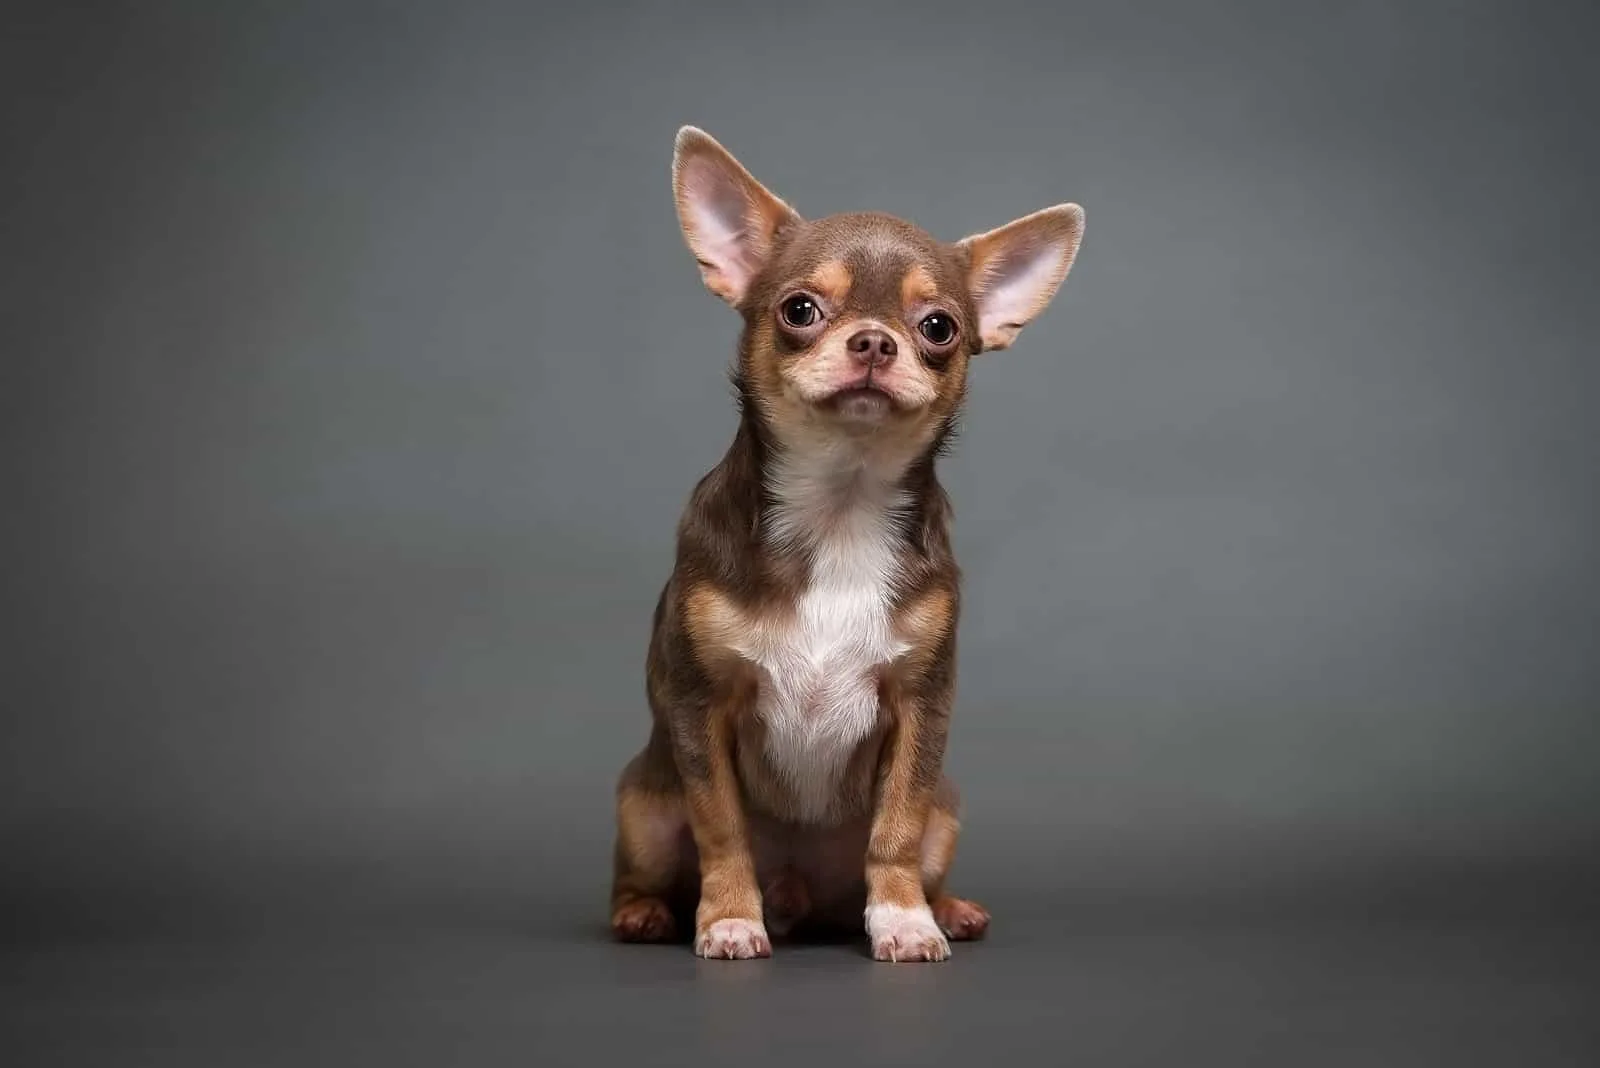 Chihuahua sitting in front of grey background